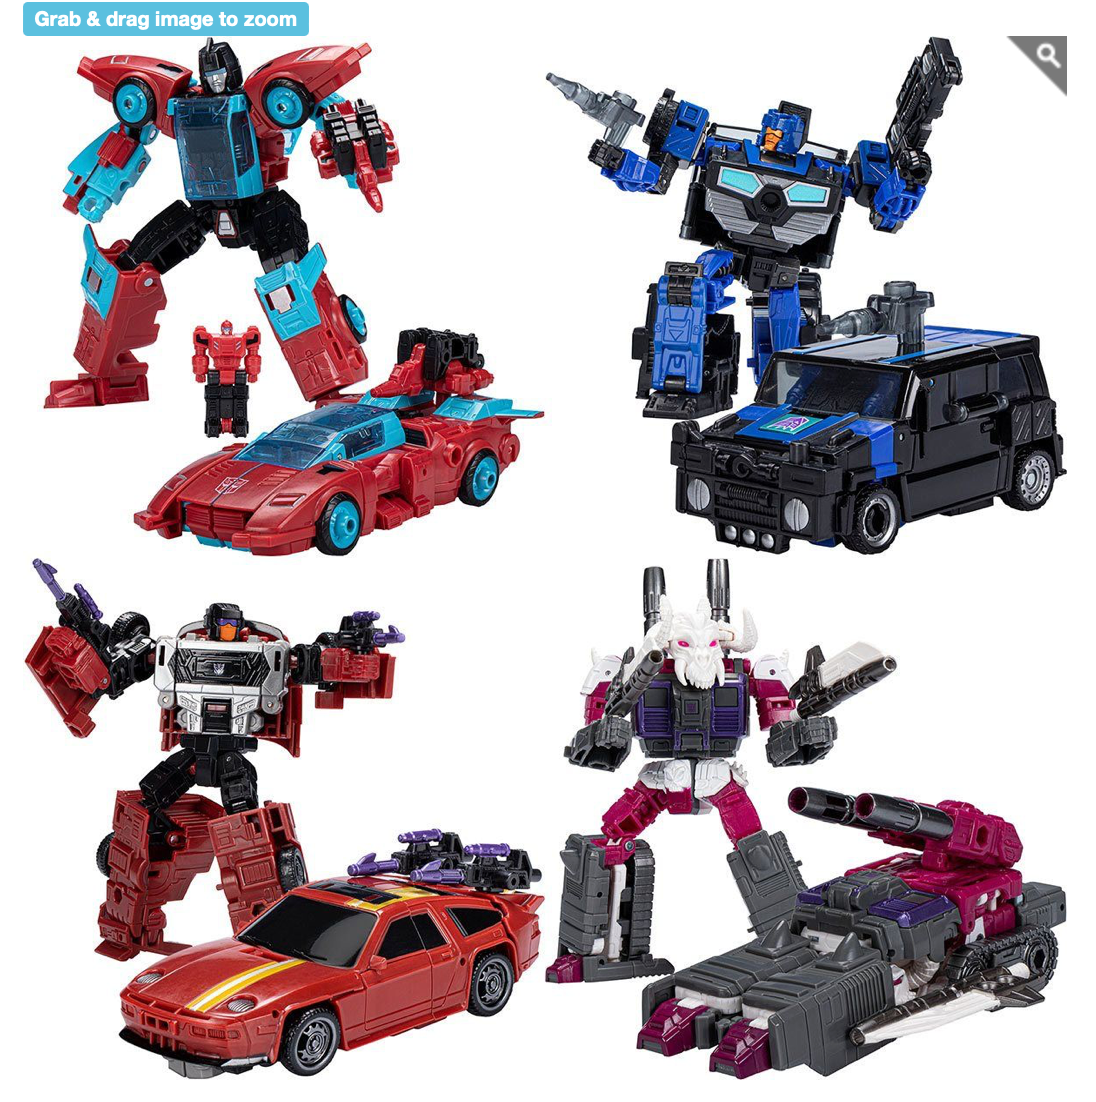 Hasbro - Transformers Generations Legacy - Deluxe Wave 3 - Set of 4 (Pointblank, Crankcase, Dead End, Skullgrin) - Marvelous Toys